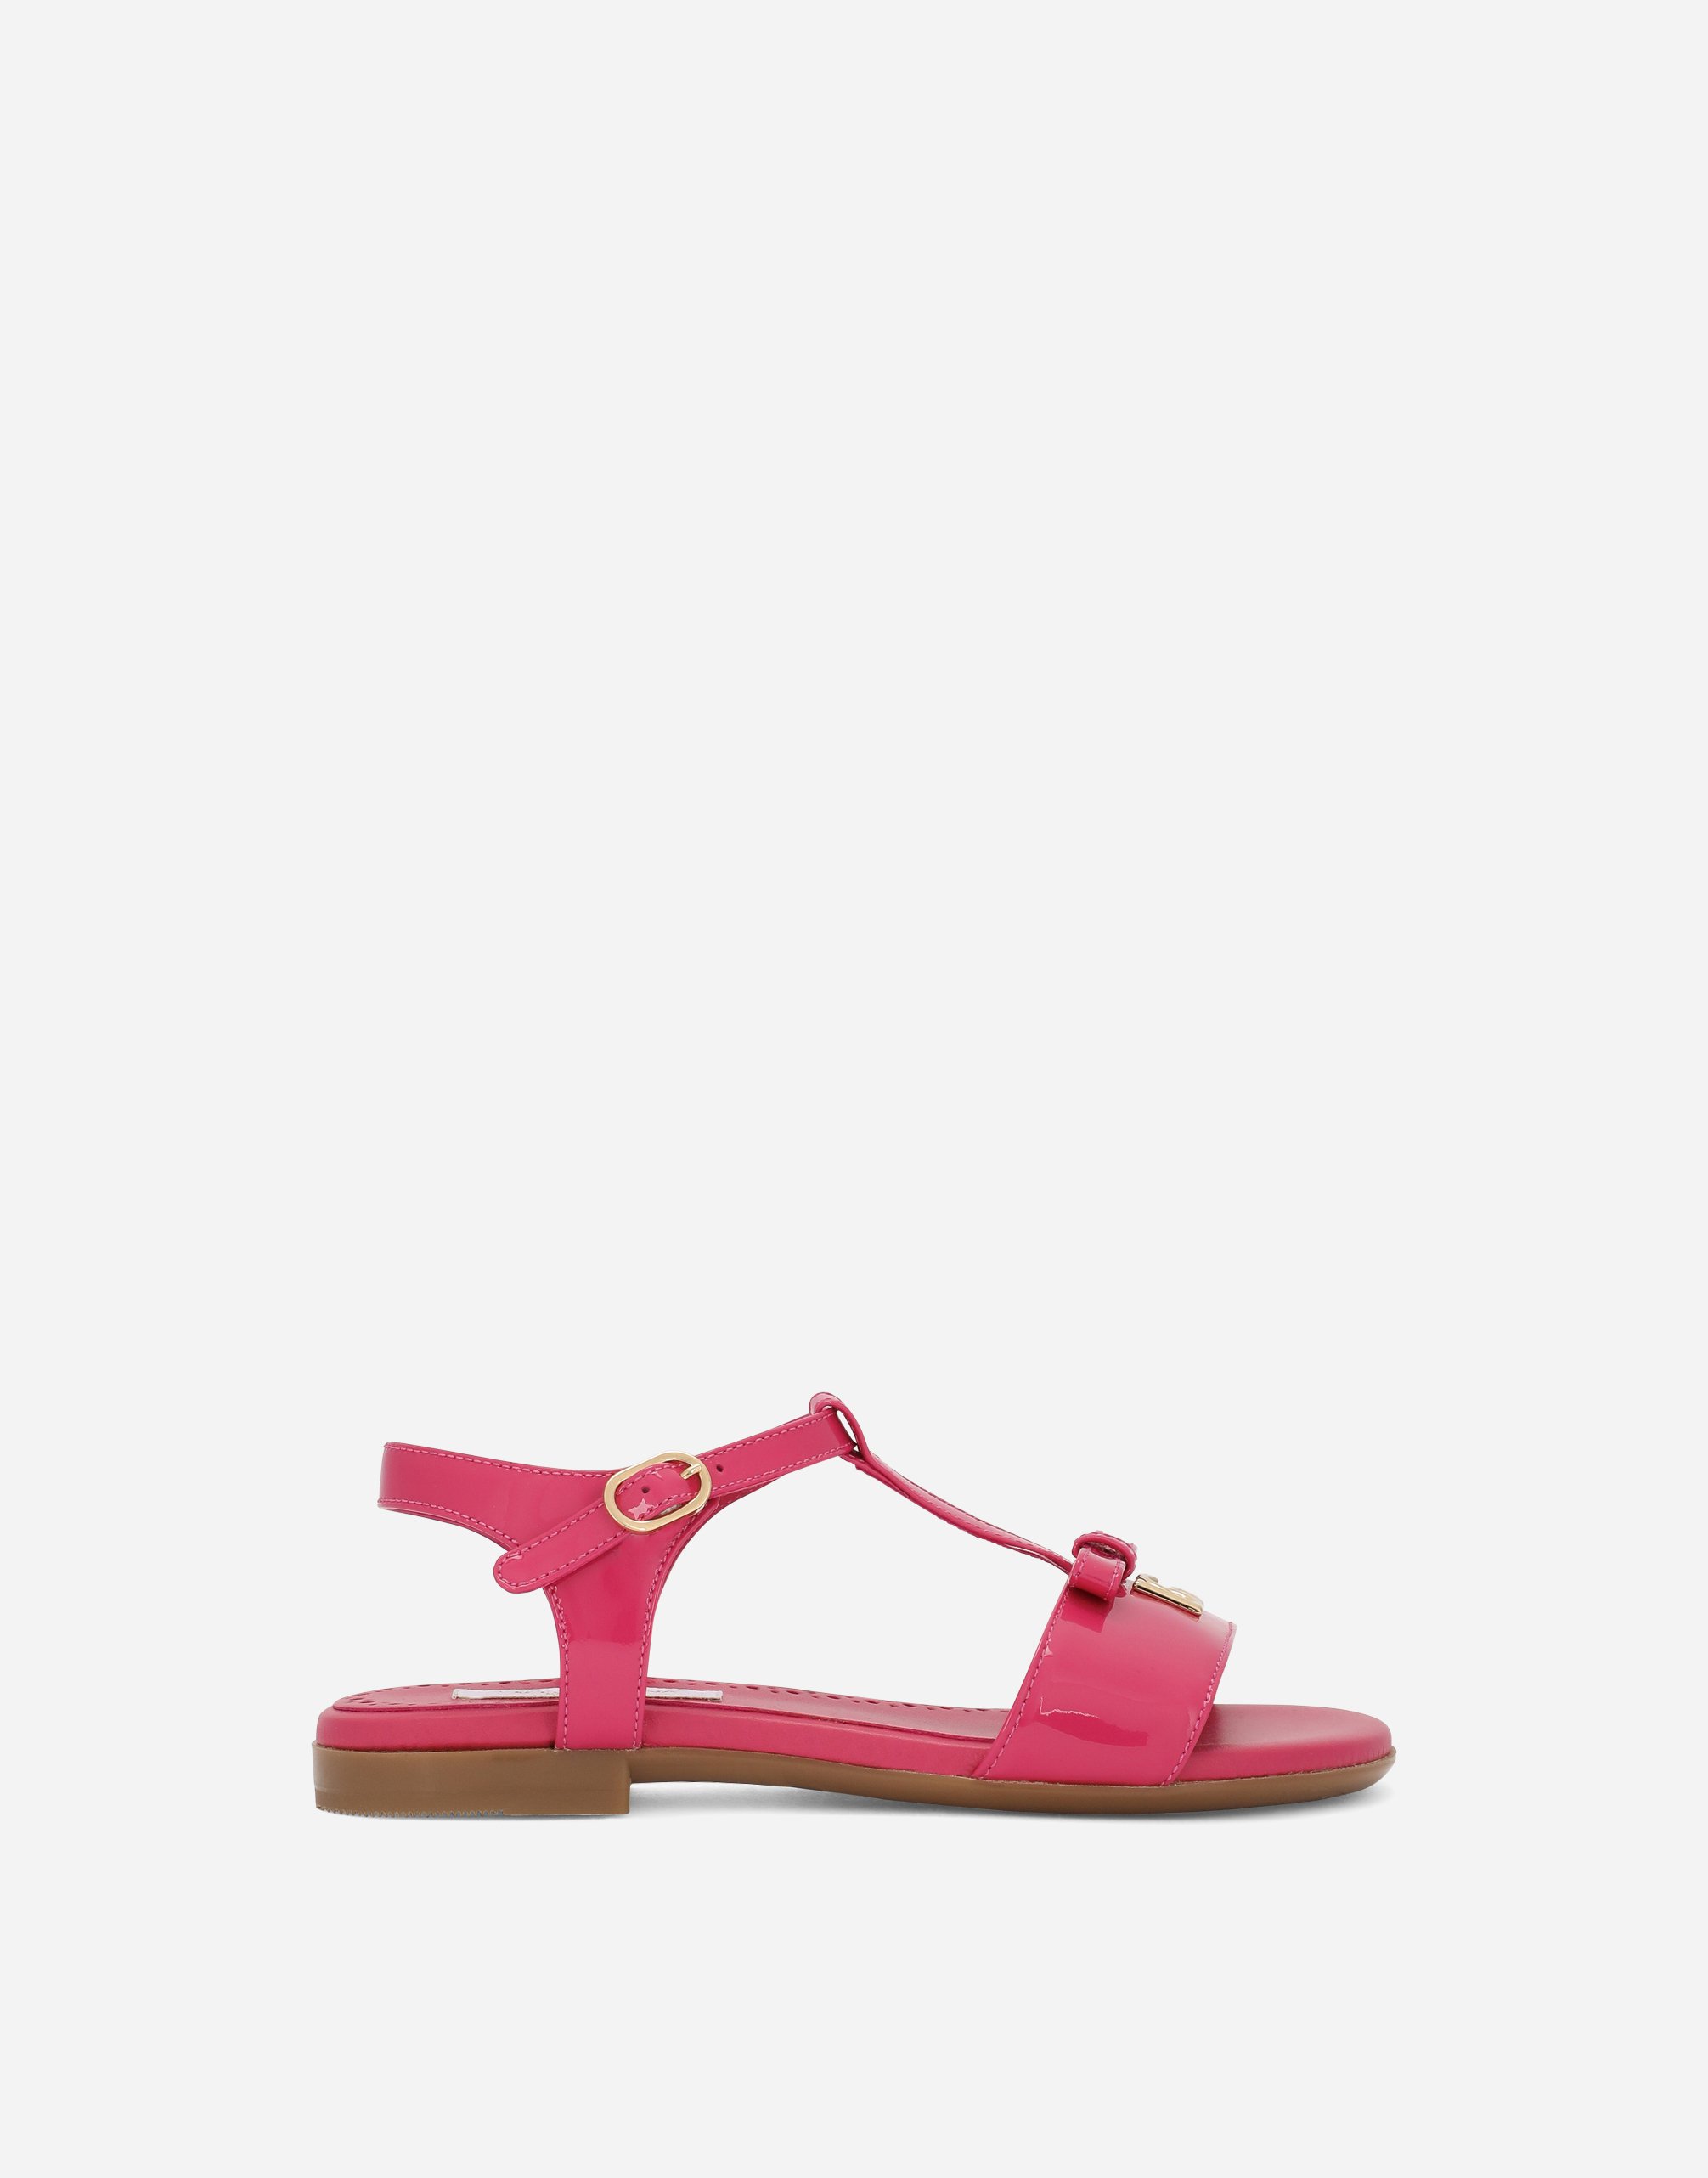 Dolce & Gabbana Kids' Patent Leather Sandals With Metal Dg Logo In Pink